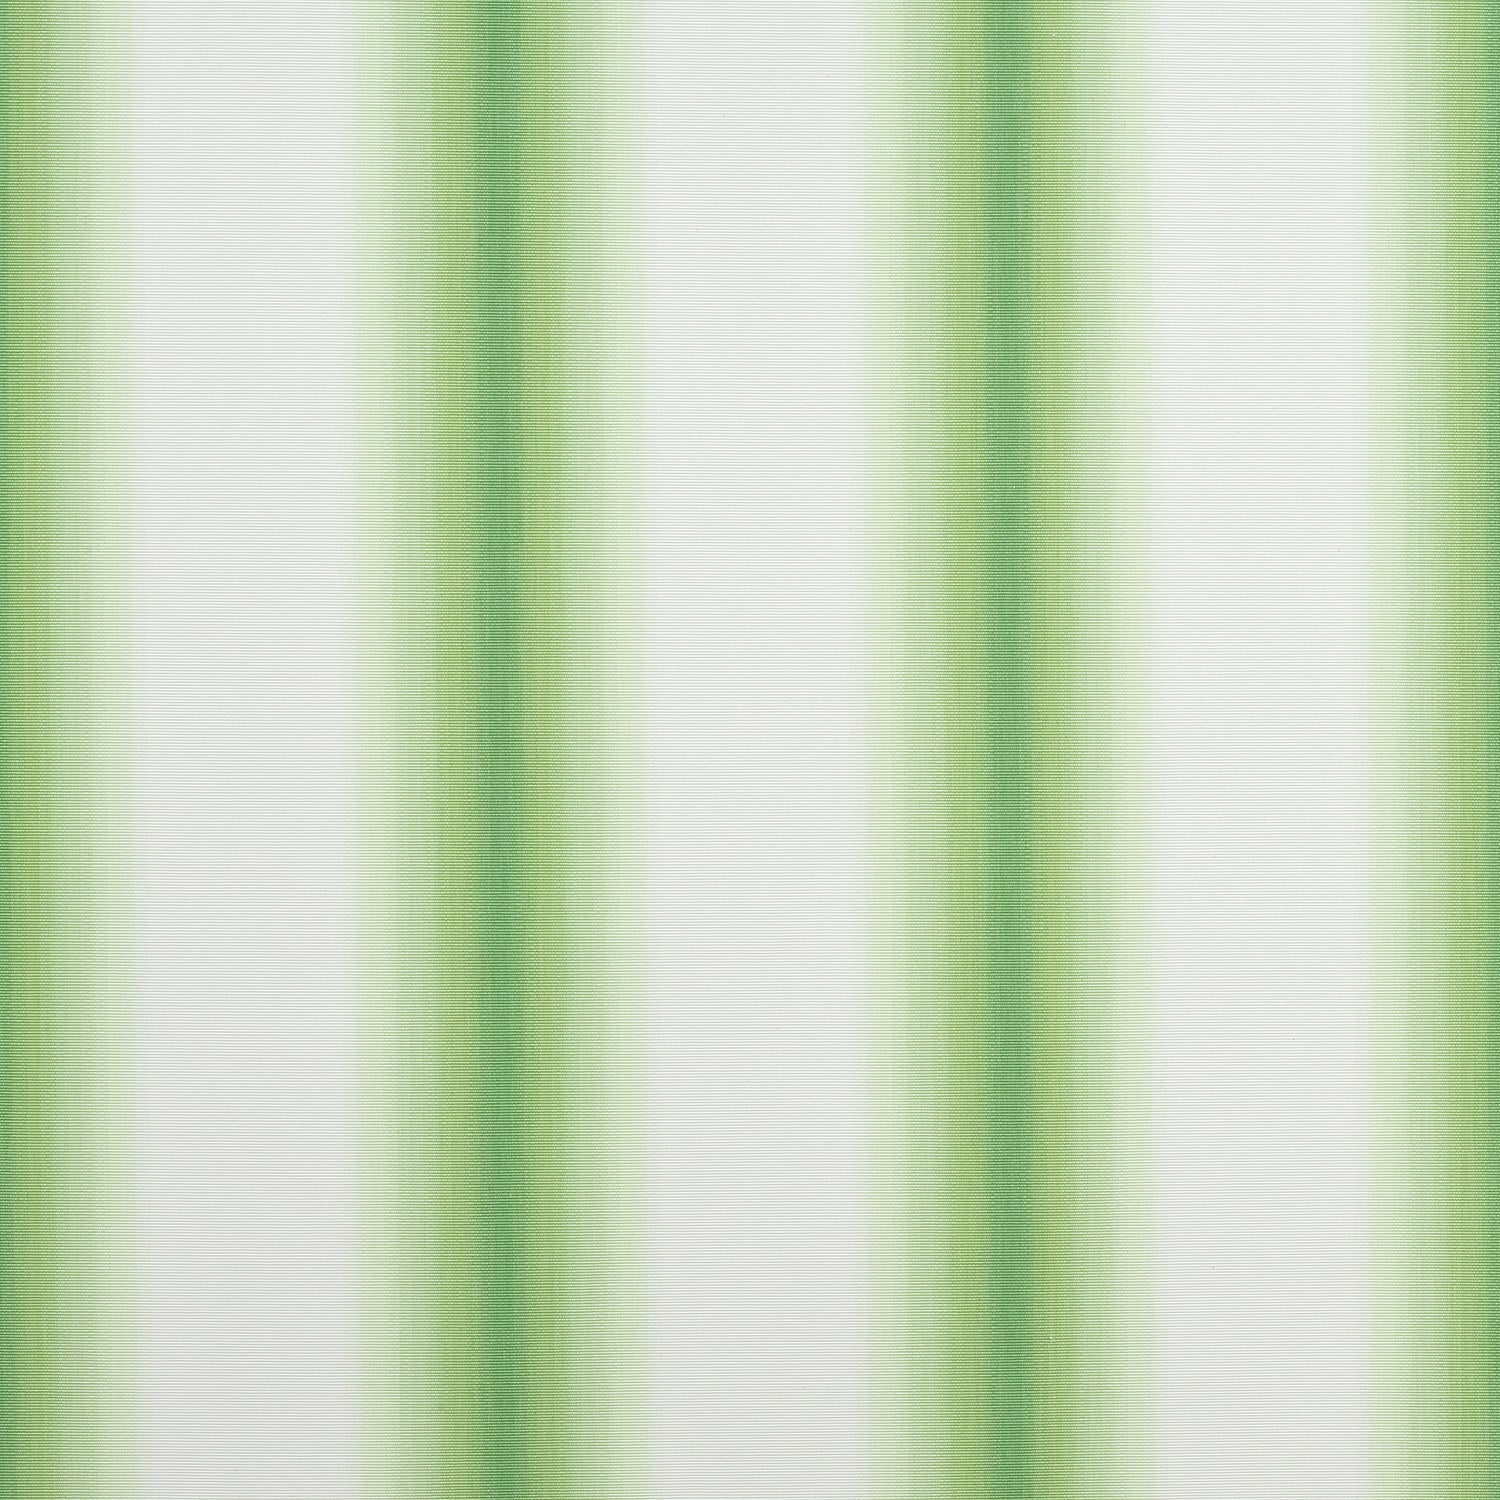 Stockton Stripe fabric in green color - pattern number W775495 - by Thibaut in the Dynasty collection